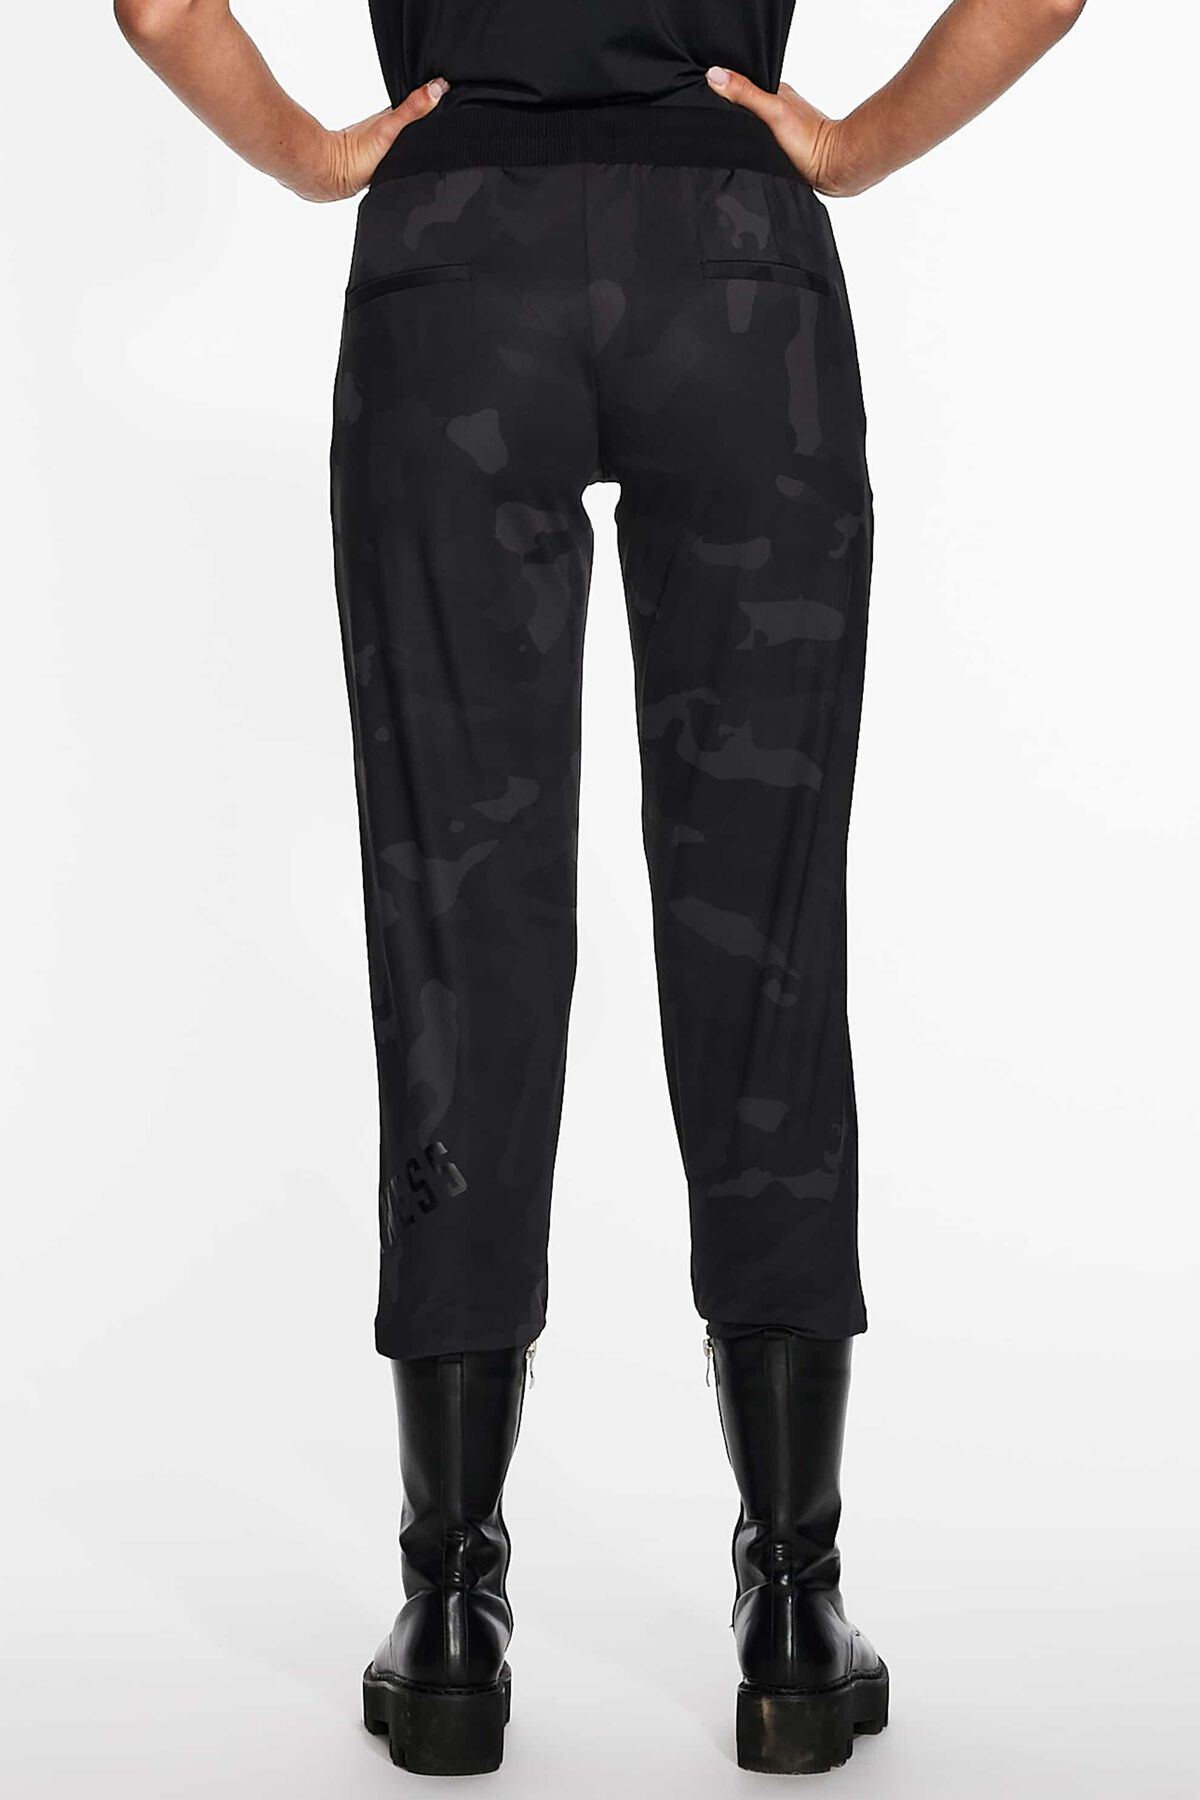 Fairway Camo Jogger  Shop the Highest Quality Golf Apparel, Gear,  Accessories and Golf Clubs at PXG